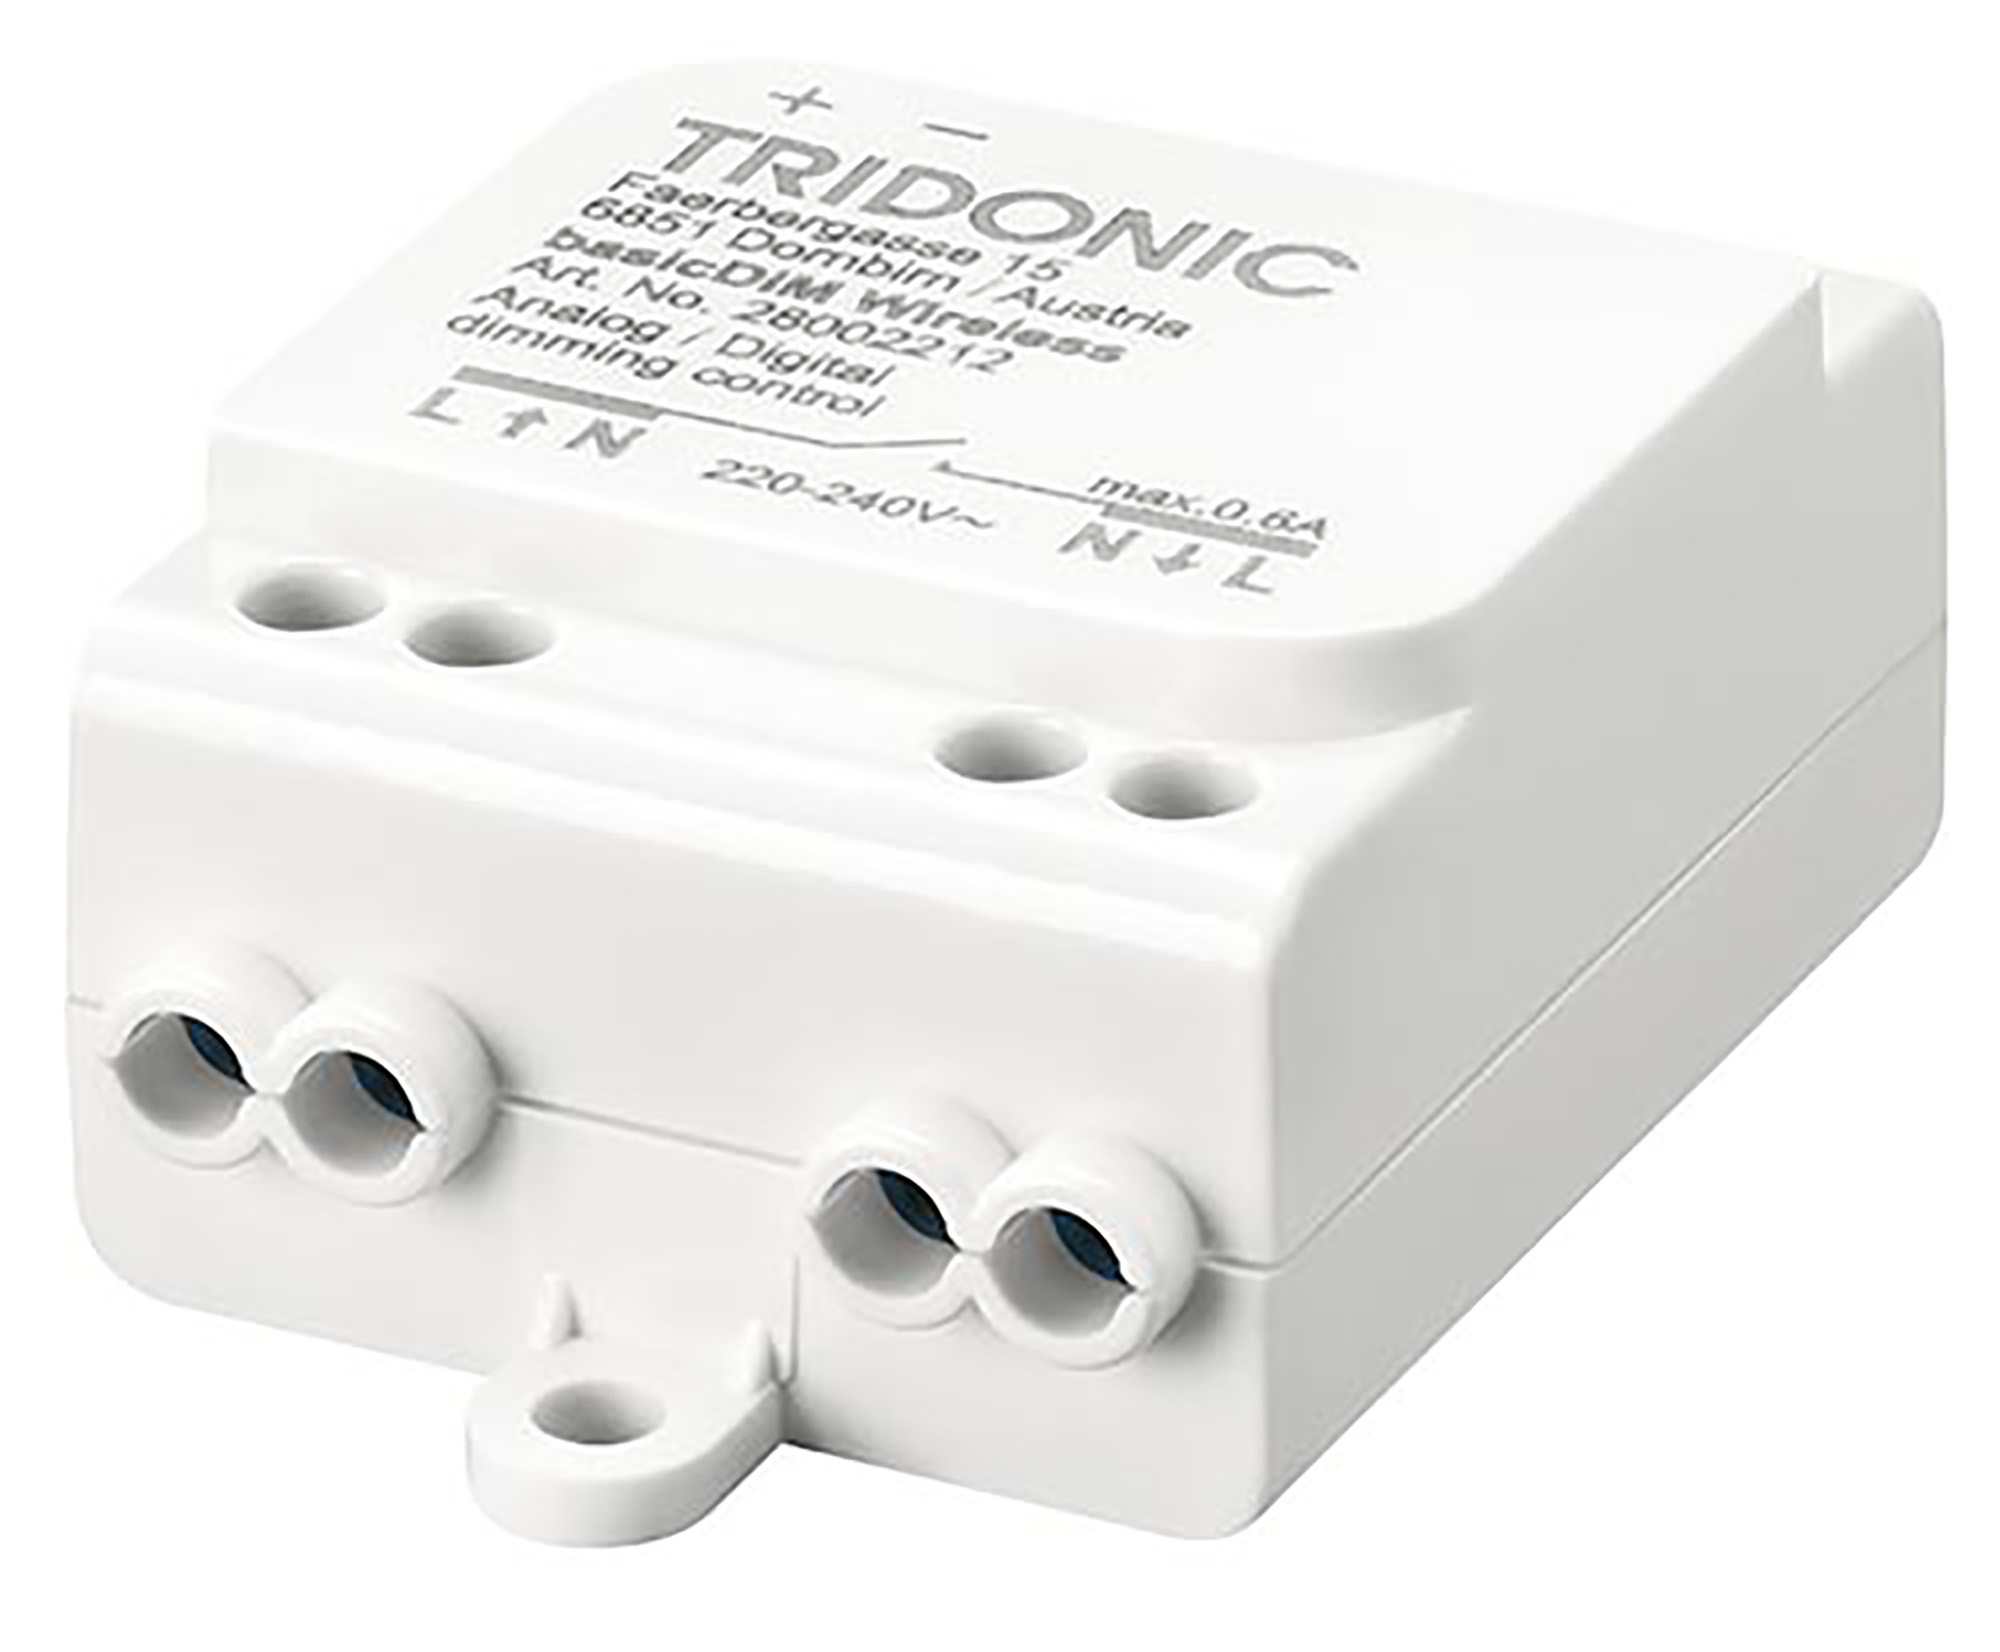 28002212  basicDIM Wireless module; 2.4 – 2.483 GHz Radio transceiver operating frequencies; Rated supply voltage 220 – 240 Vac; Configurable analog / digital output 0-10 V / 1-10 V and DALI; P20.